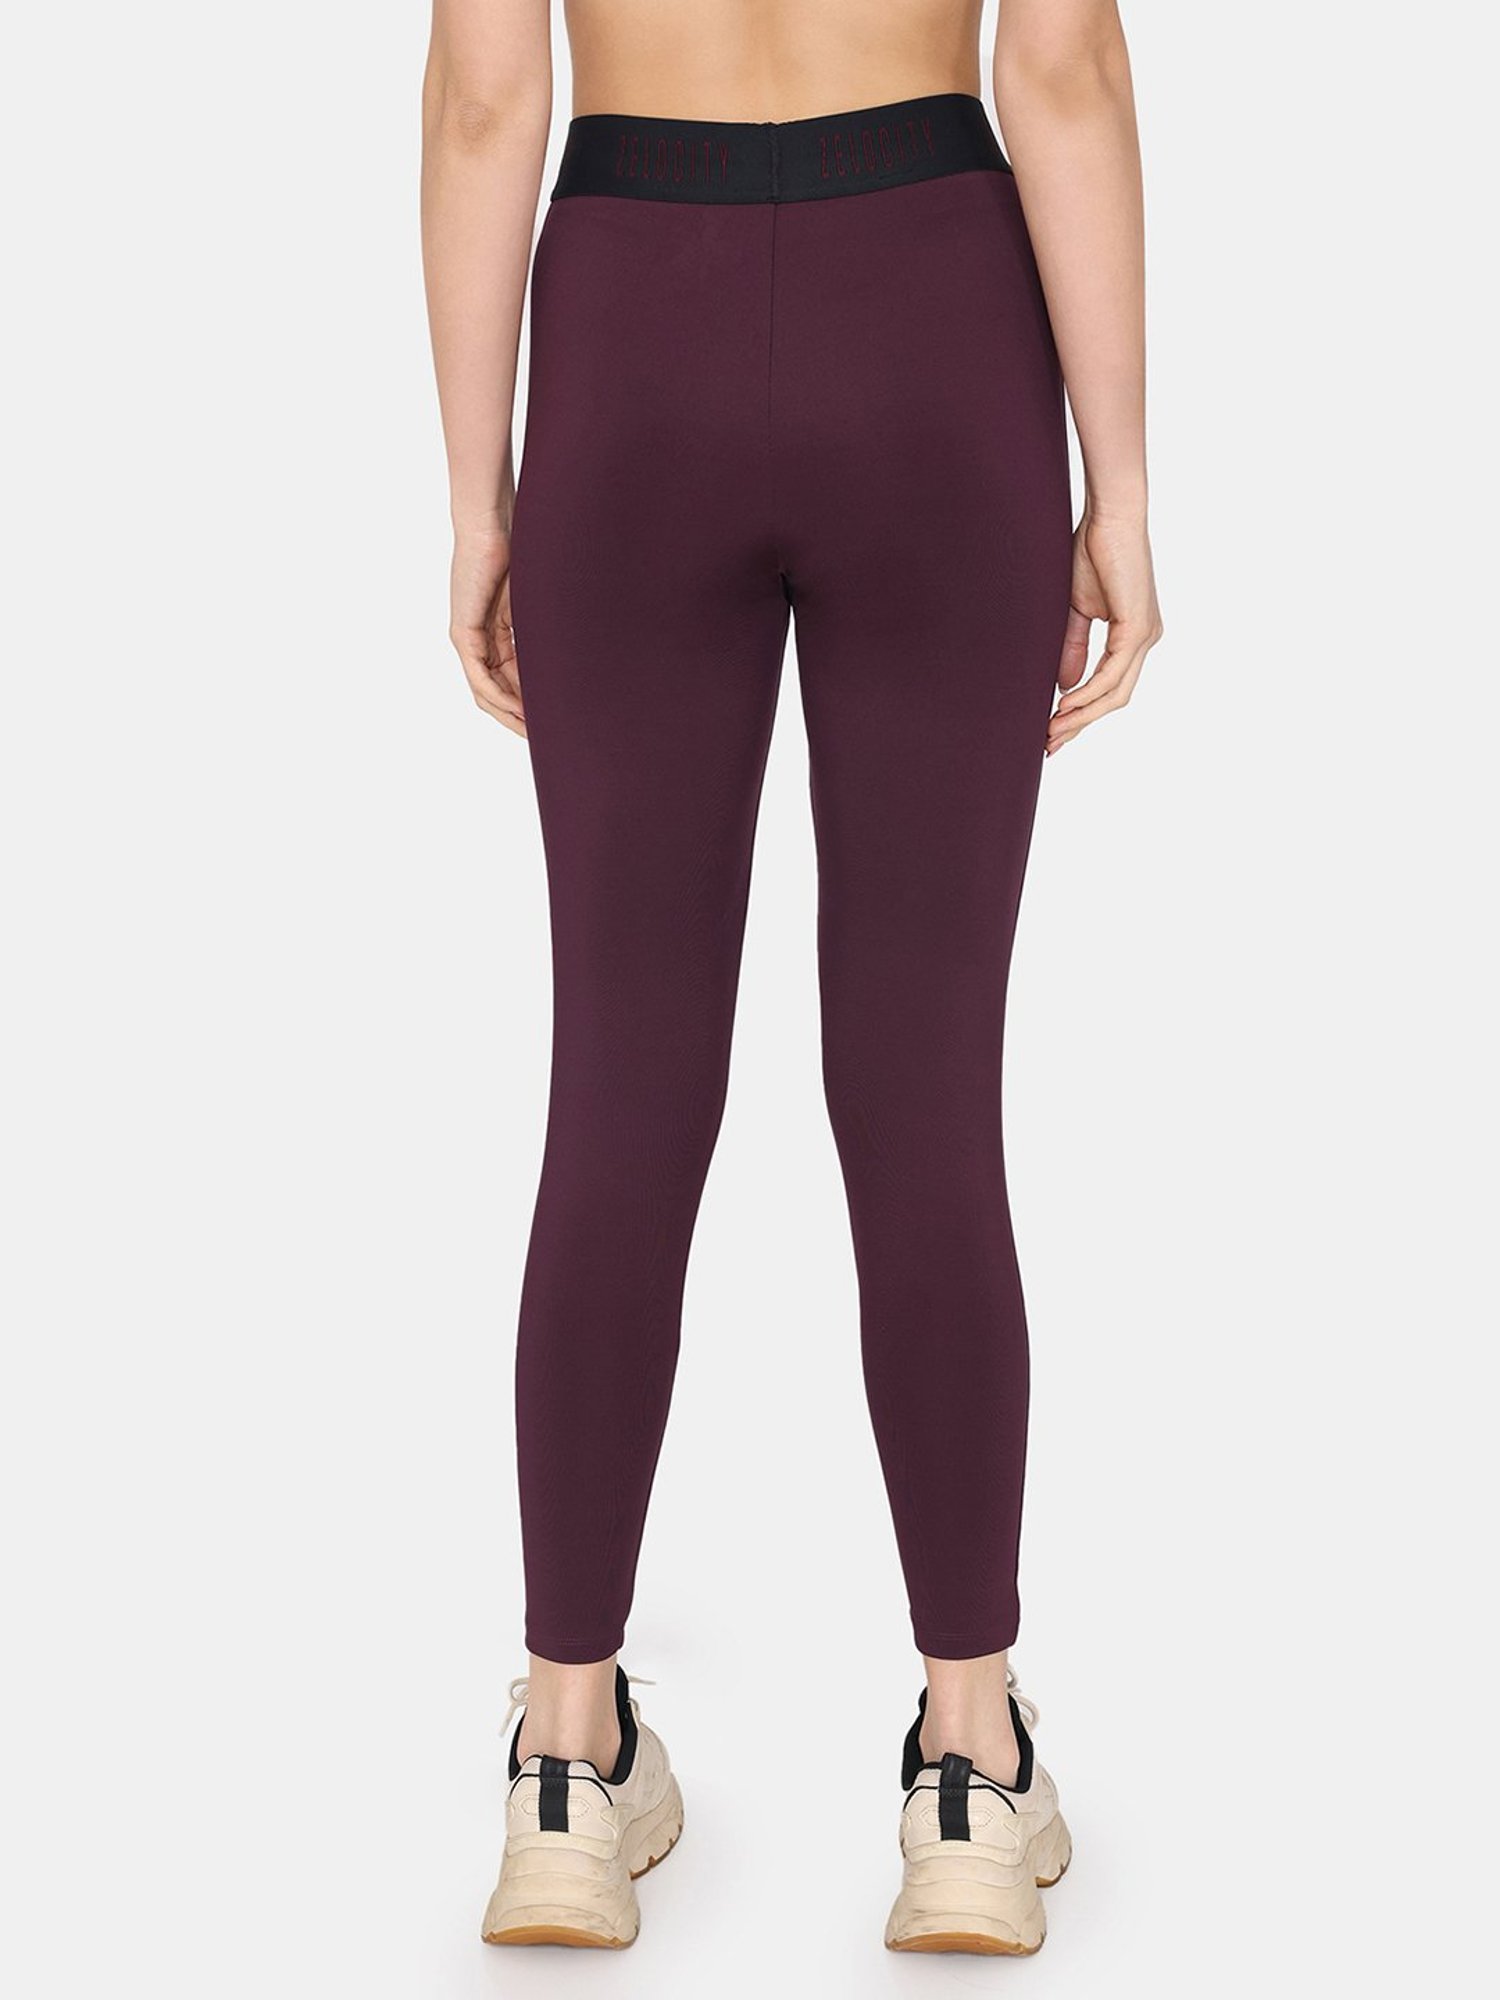 Zelocity by Zivame Solid Women Purple Tights - Buy Zelocity by